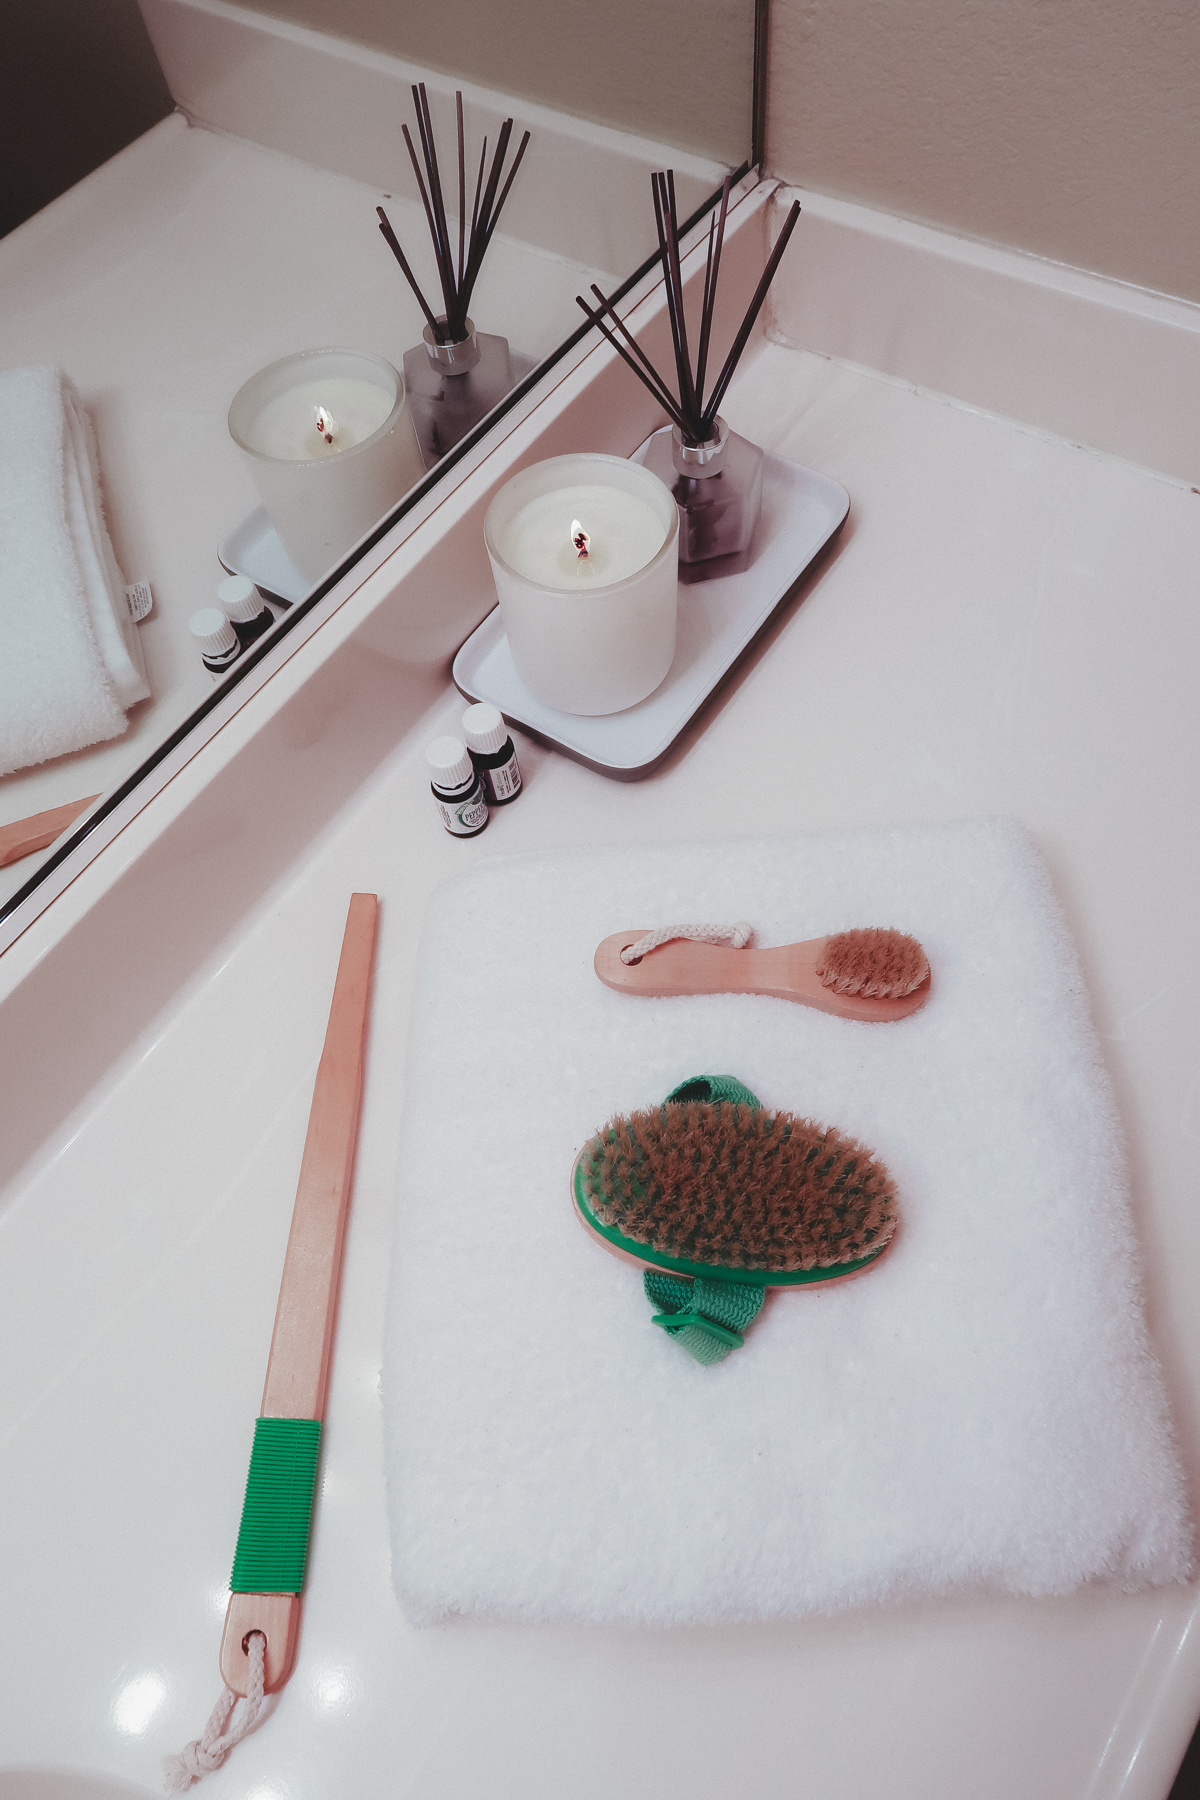 How To Clean A Dry Body Brush In 5 Quick Steps featured by top US beauty blog, Tea Cups & Tulips